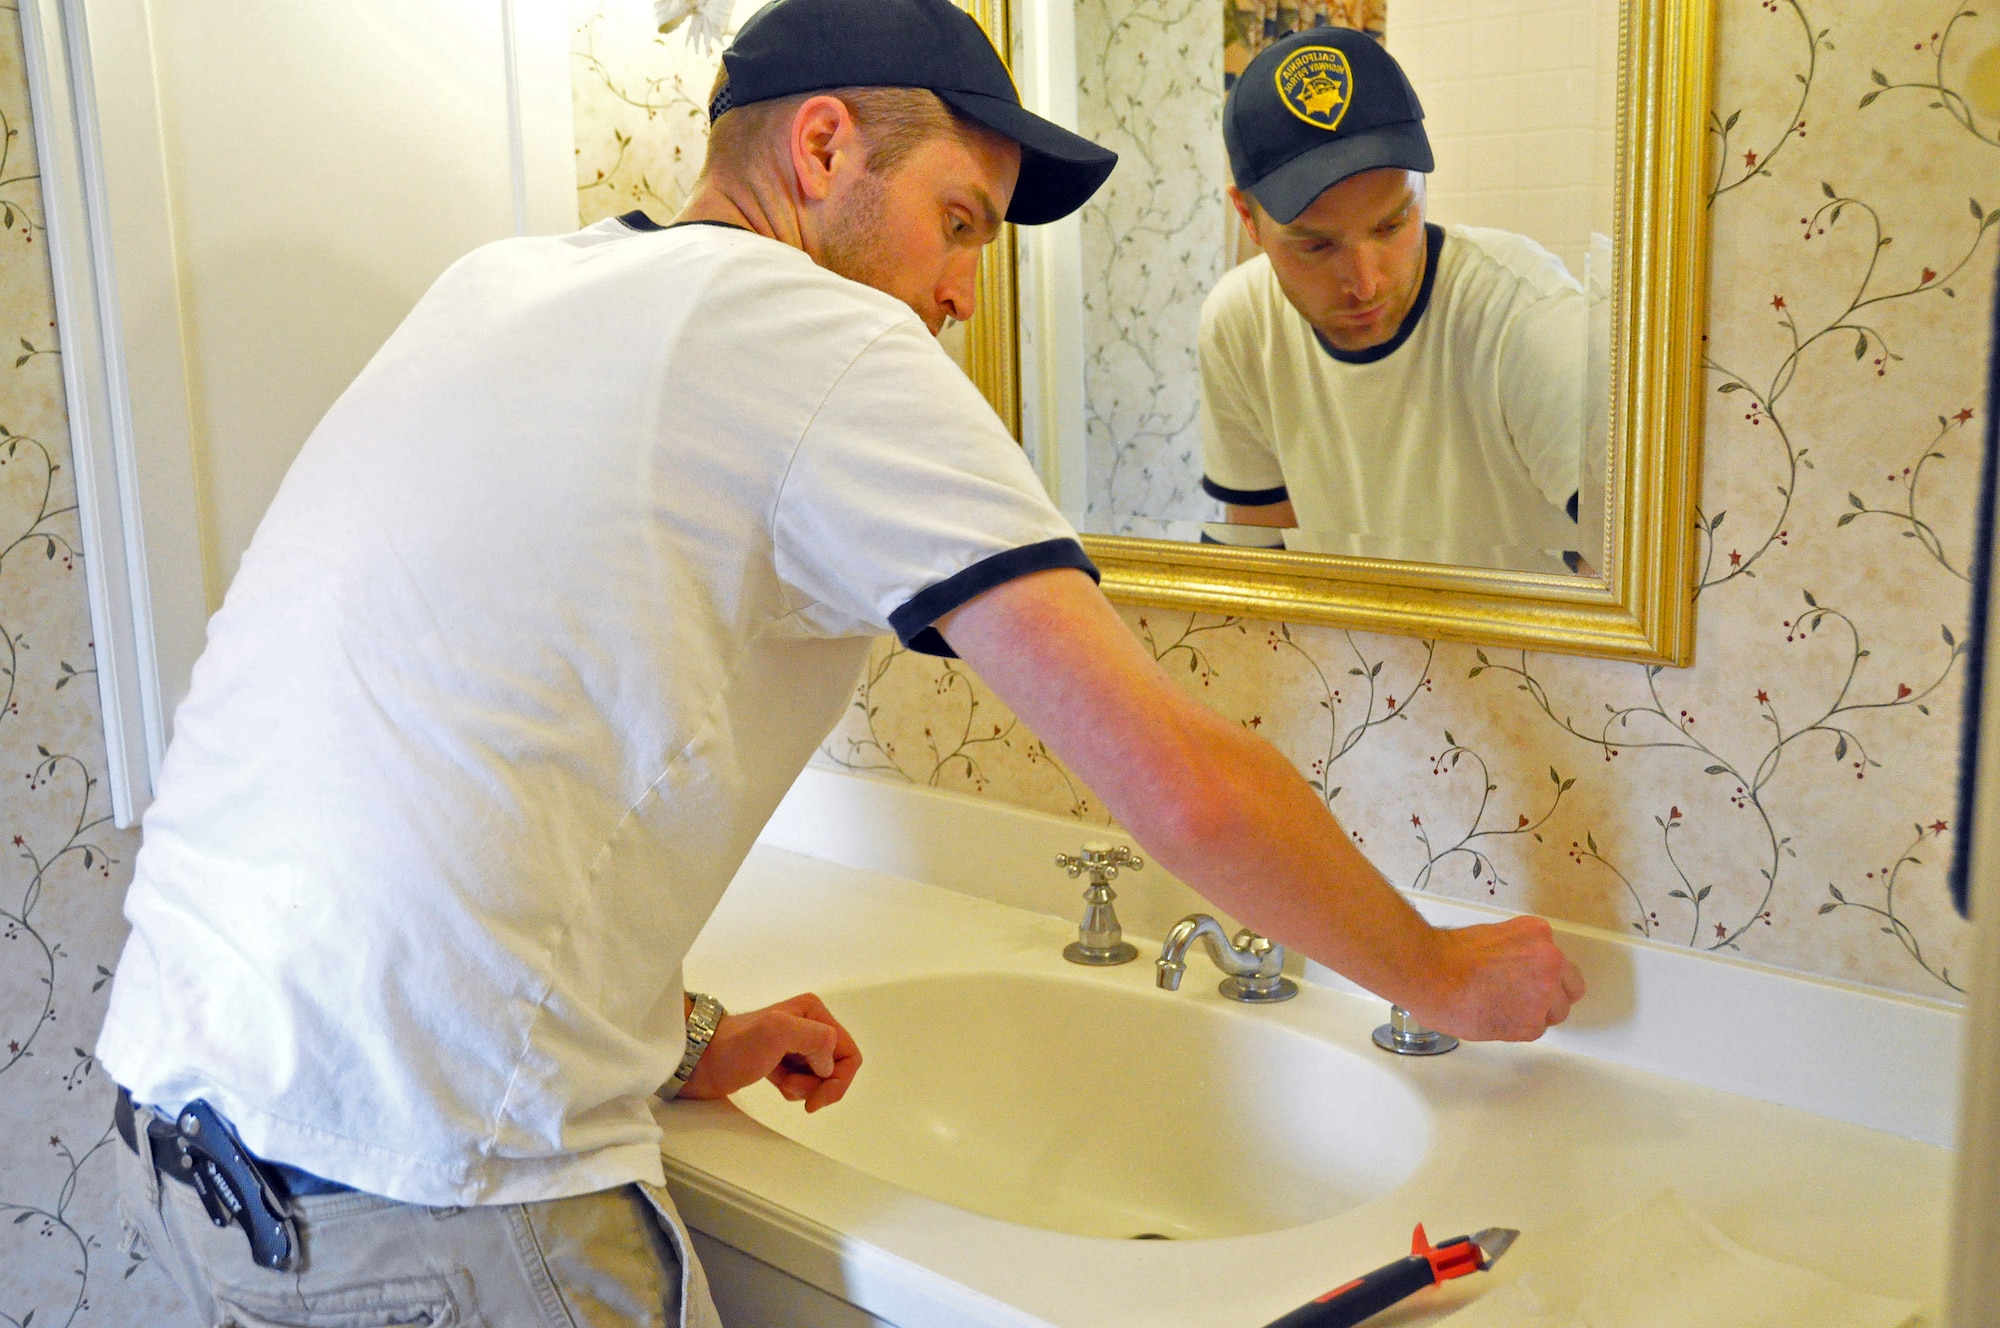 Joshua Henderson, one of 66 volunteers that renovated the Travis Fisher House, re-caulks the bathroom sinks throughout the house Nov. 18. The Fisher House provides a respite for family members of patients staying at David Grant USAF Medical Center, free from financial stress. (U.S. Air Force photo/Airman Madelyn Ottem)